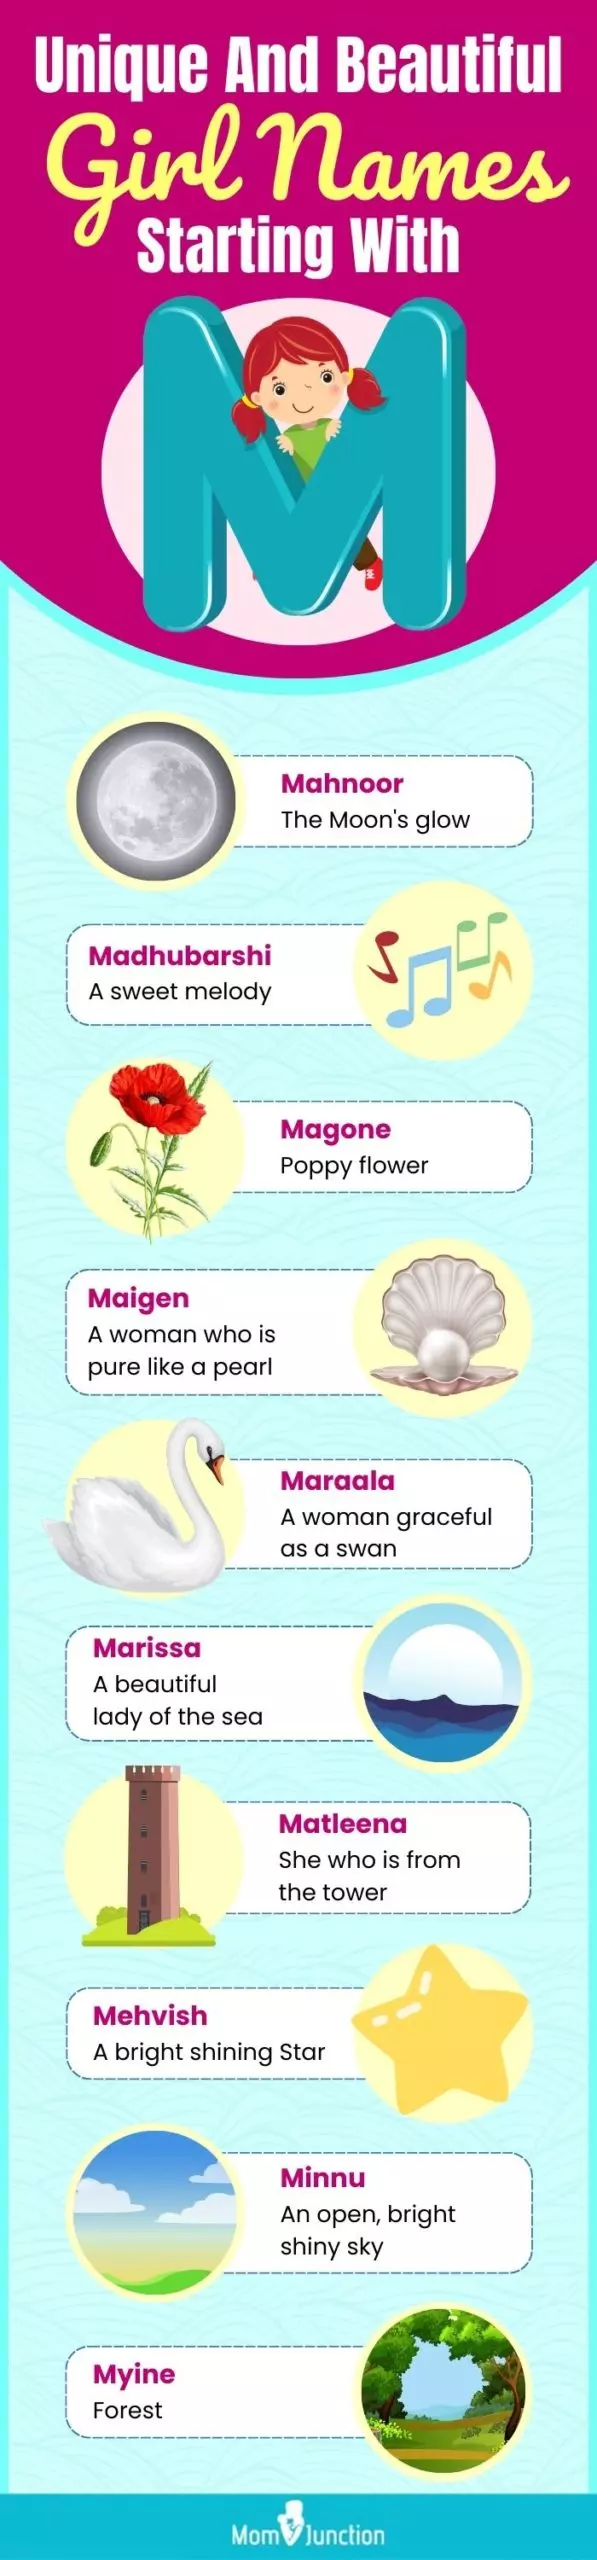 unique and beautiful girl names starting with m (infographic)